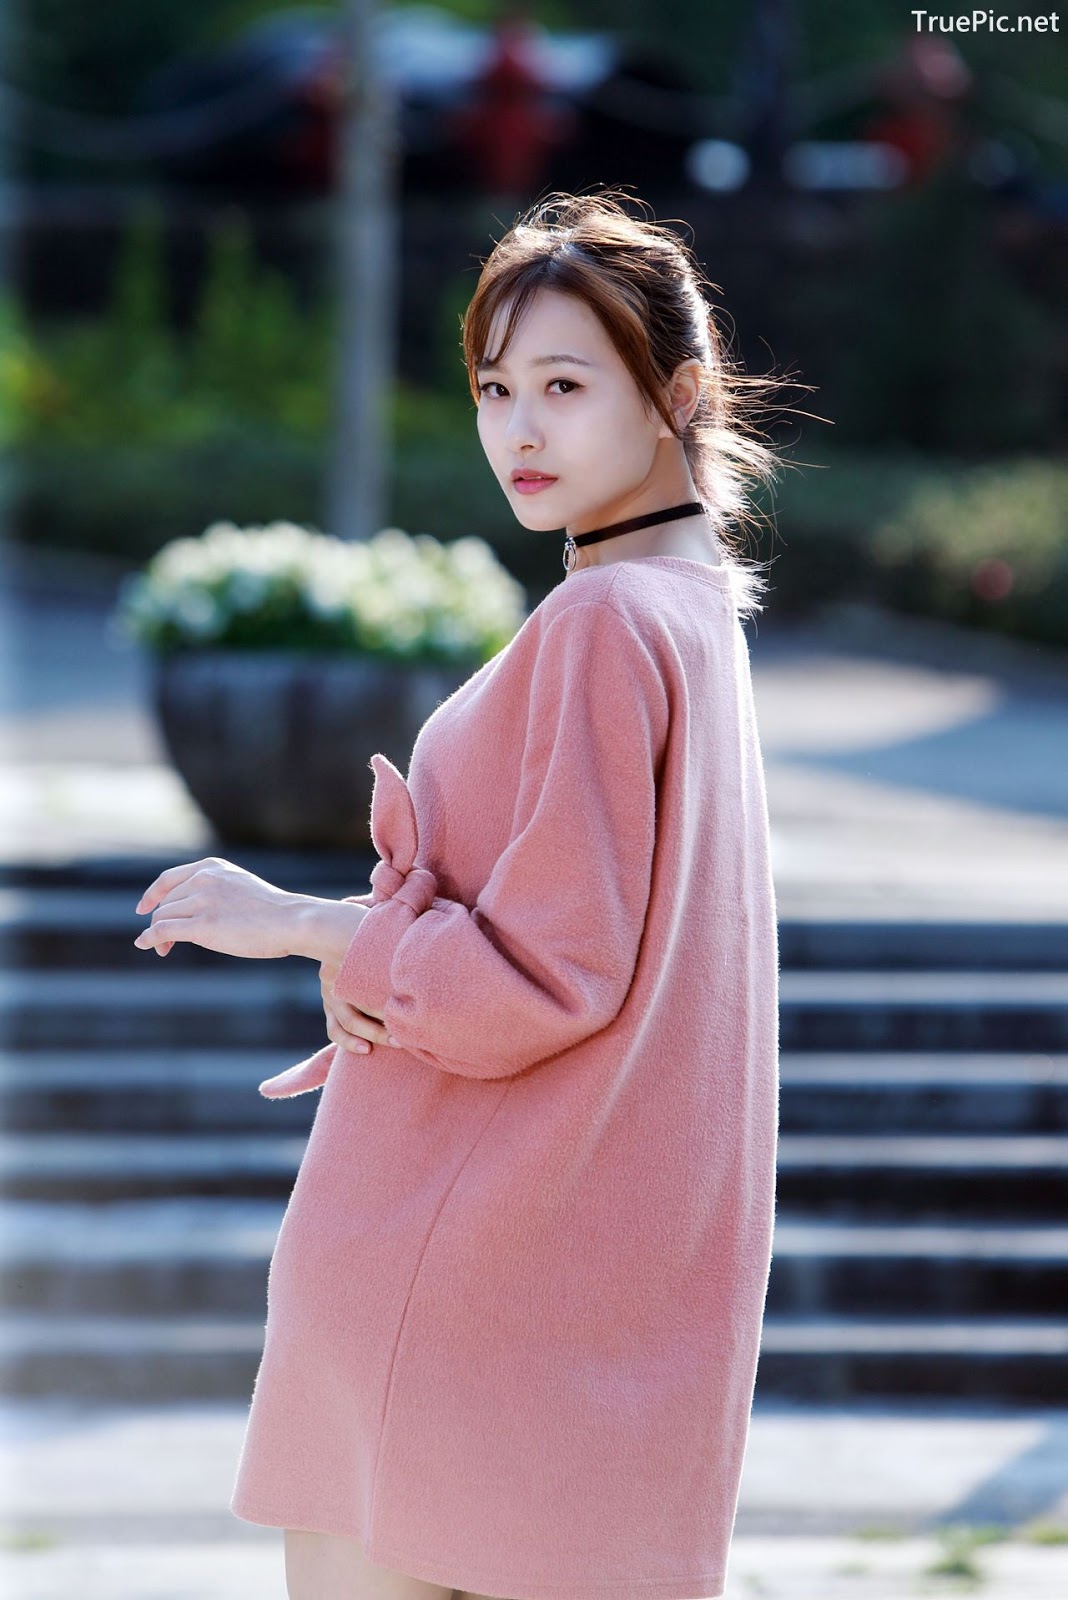 Image-Taiwanese-Model-郭思敏-Pure-And-Gorgeous-Girl-In-Pink-Sweater-Dress-TruePic.net- Picture-78